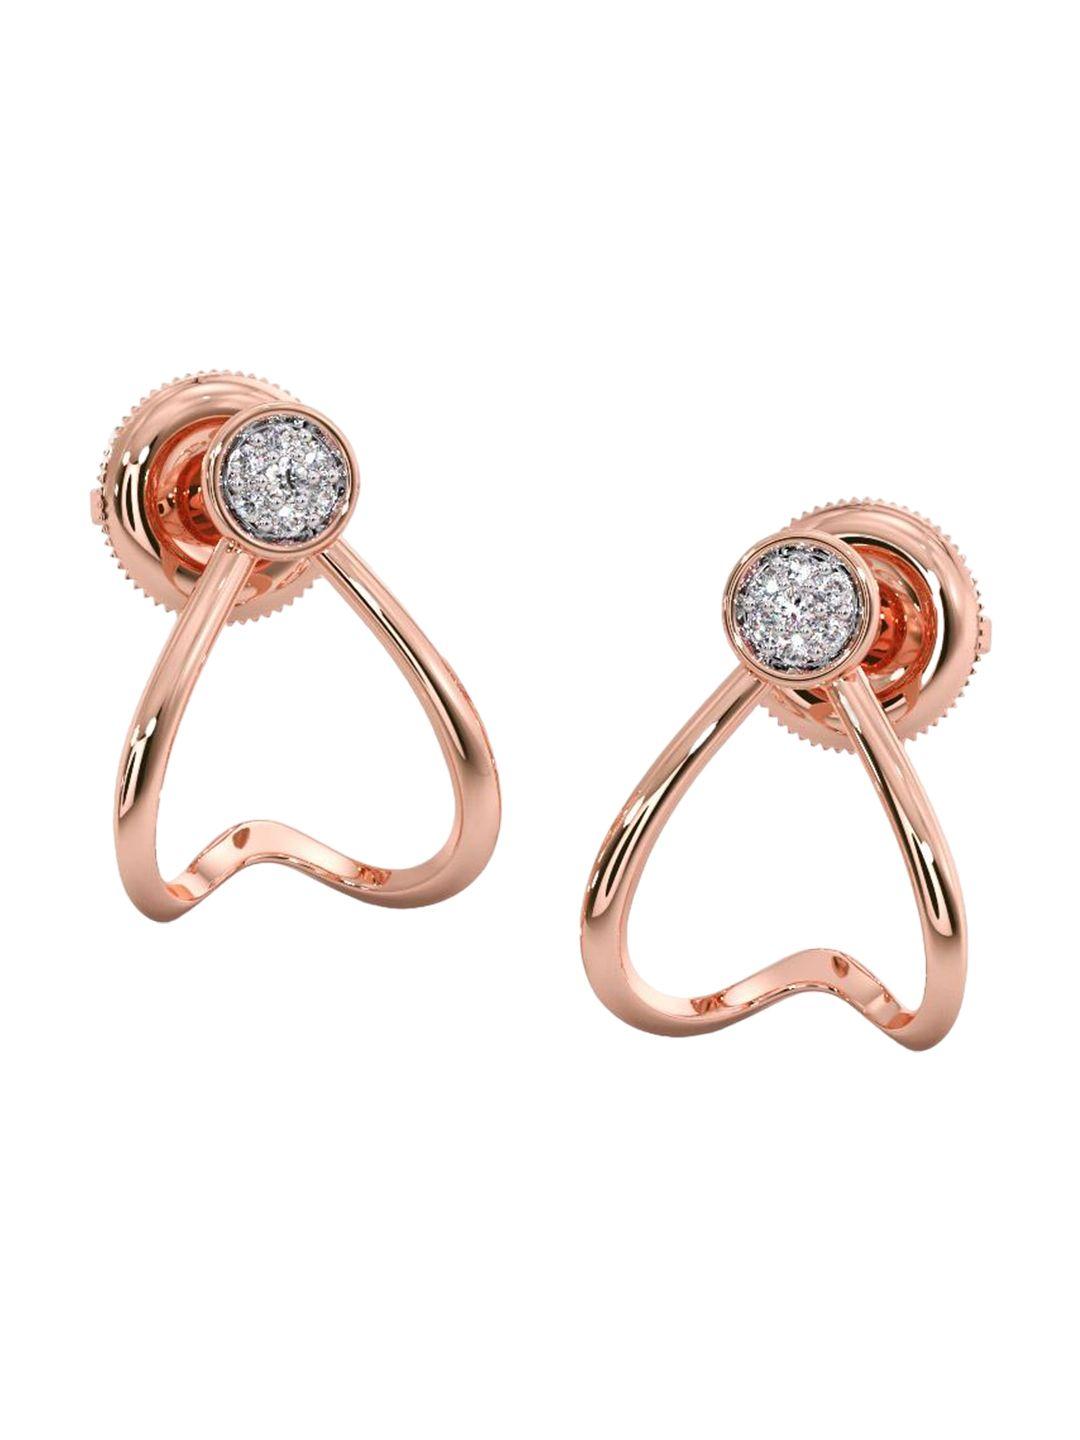 candere a kalyan jewellers company diamond-studded 14kt rose gold stud earrings - 1.27 gm